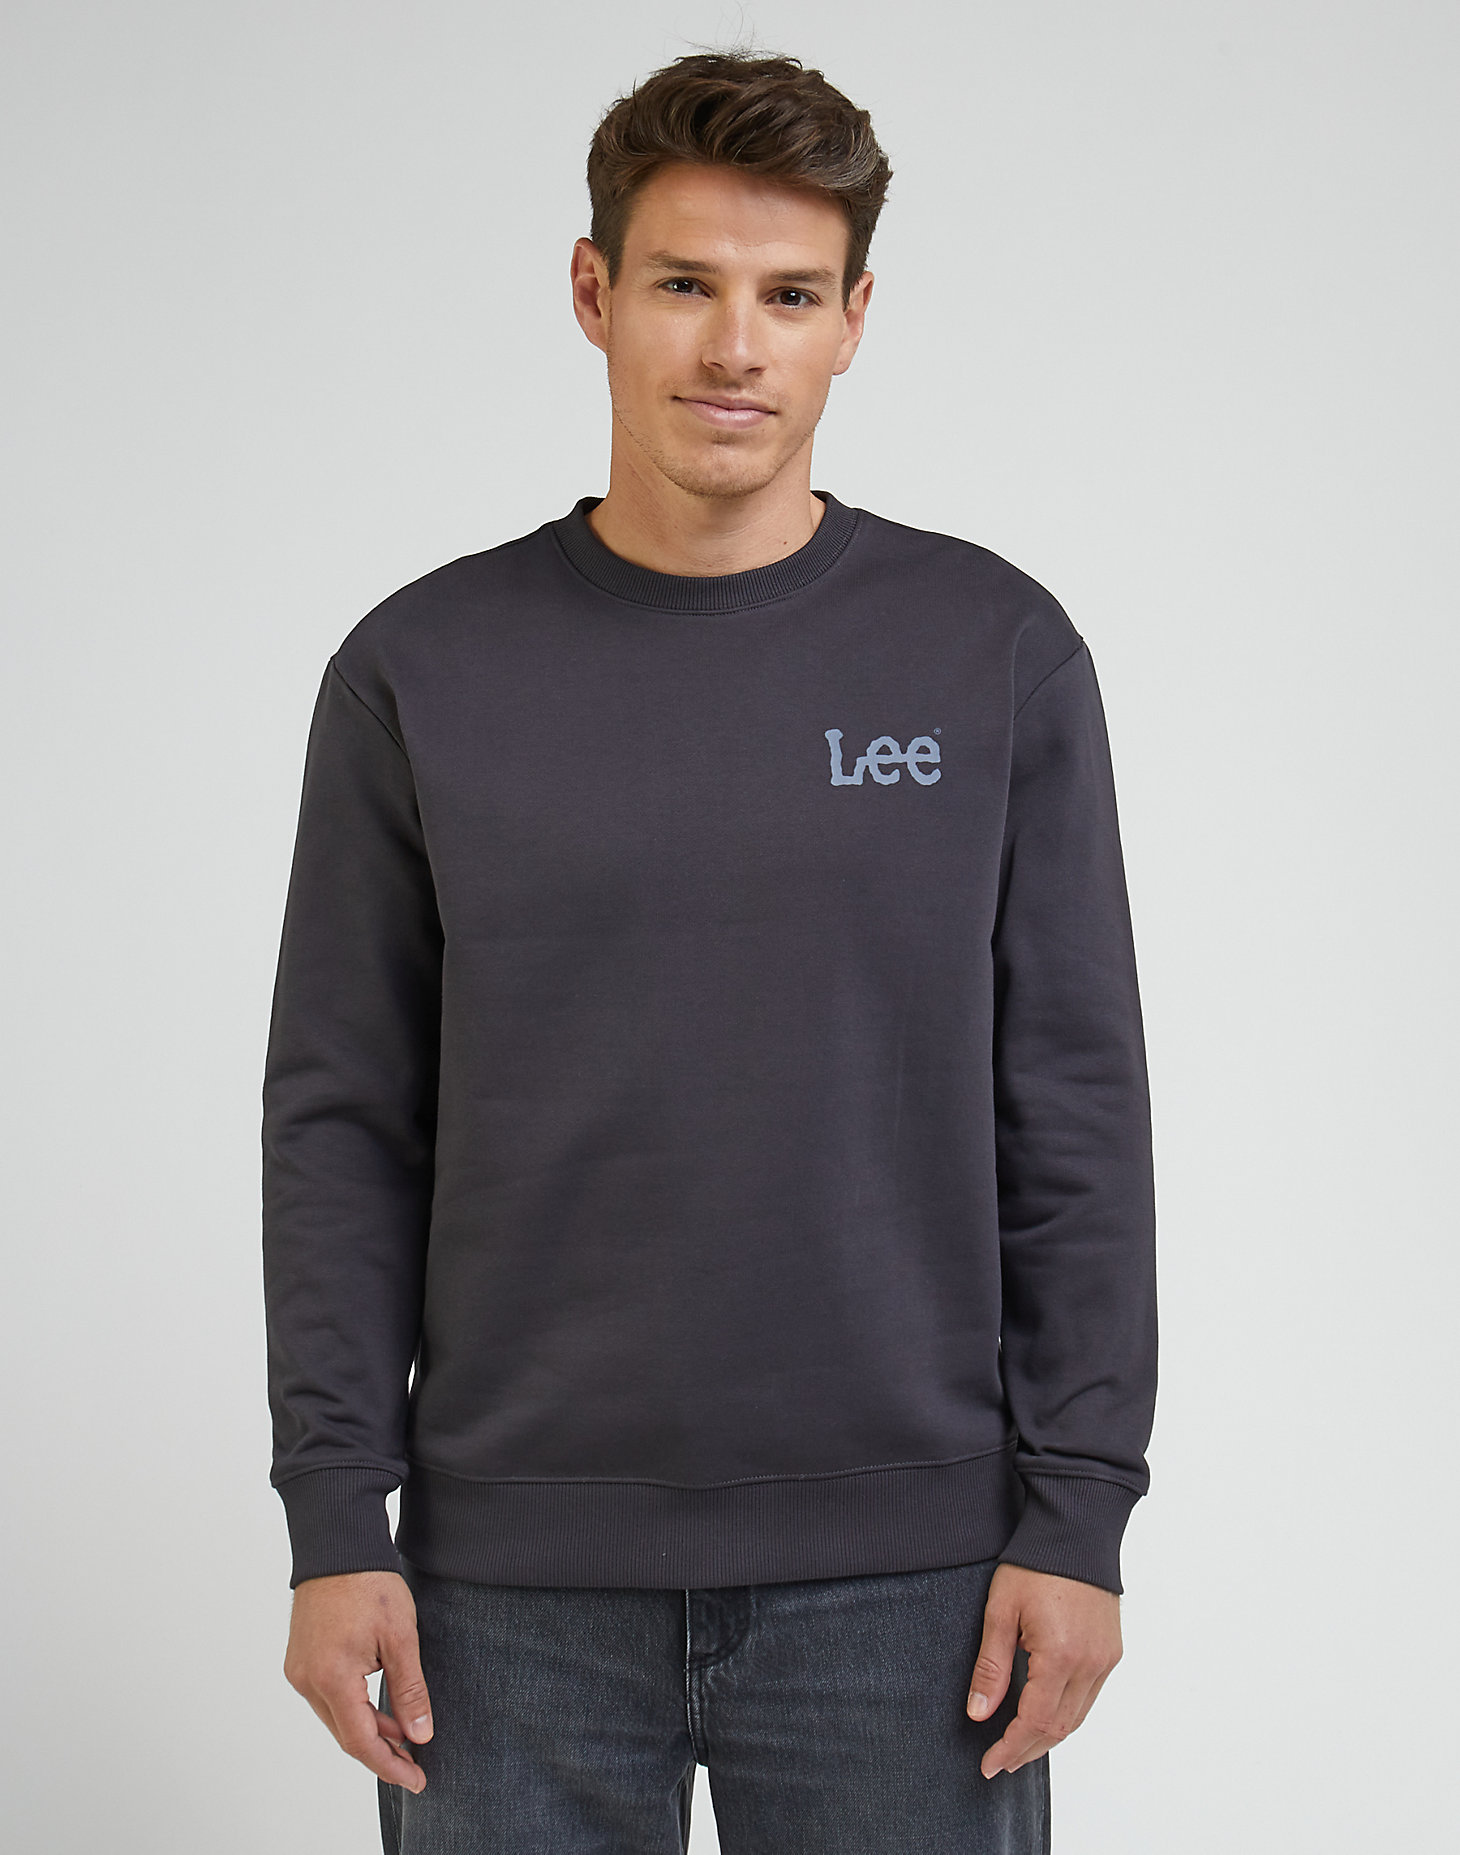 Wobbly Lee Sweatshirt in Washed Black main view